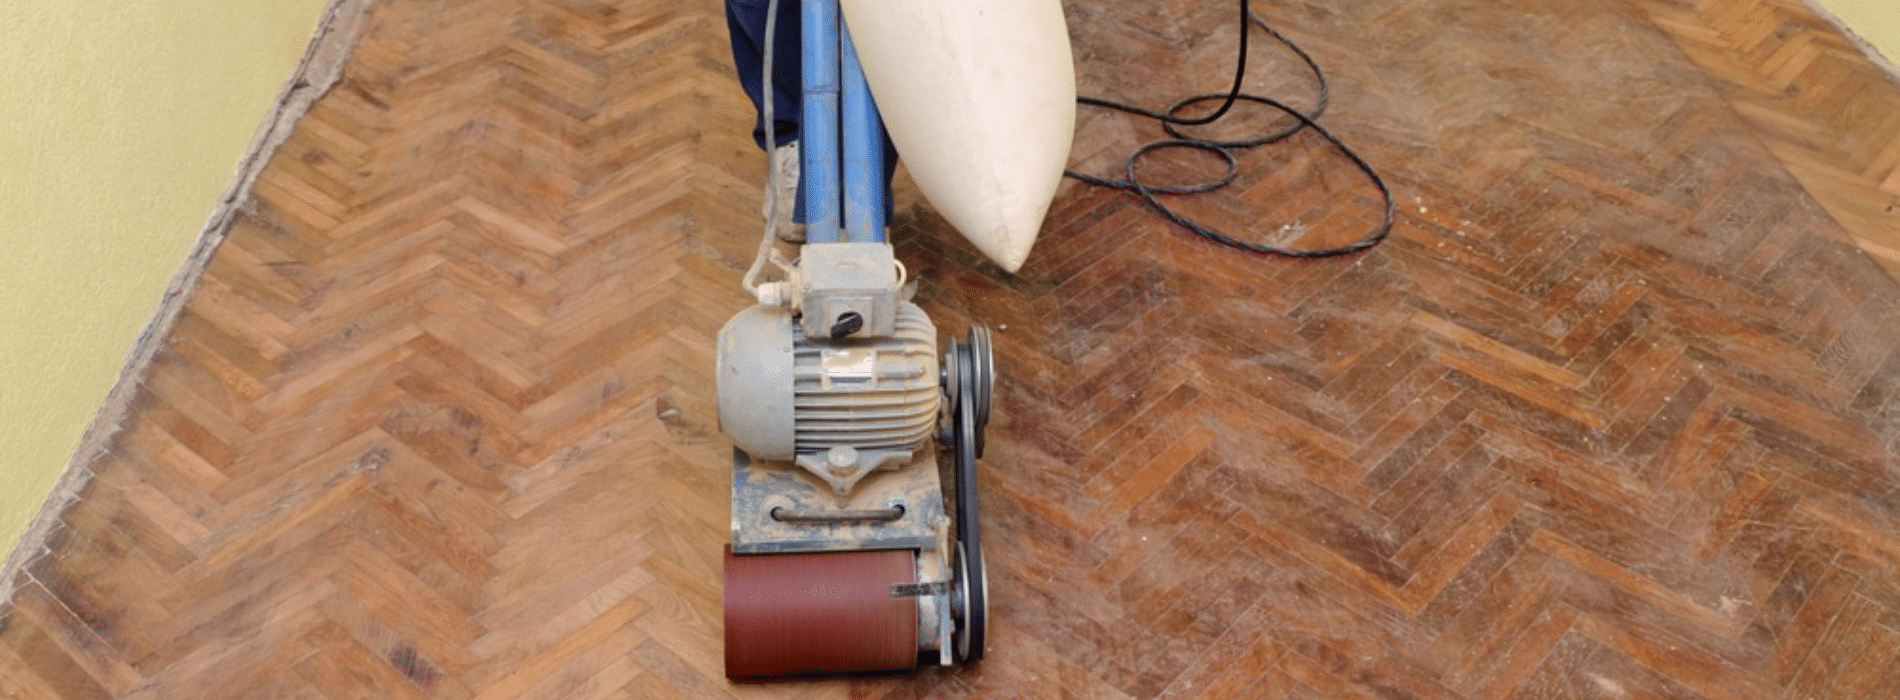 Mr Sander® in Chessington, KT9, employ the powerful Bona Belt Effect sander (2.2 kW) to sand herringbone floors. Operating at 230V and 50Hz/60Hz, this 250x750 mm sander is connected to a dust extraction system featuring a HEPA filter, guaranteeing a thorough and efficient result.